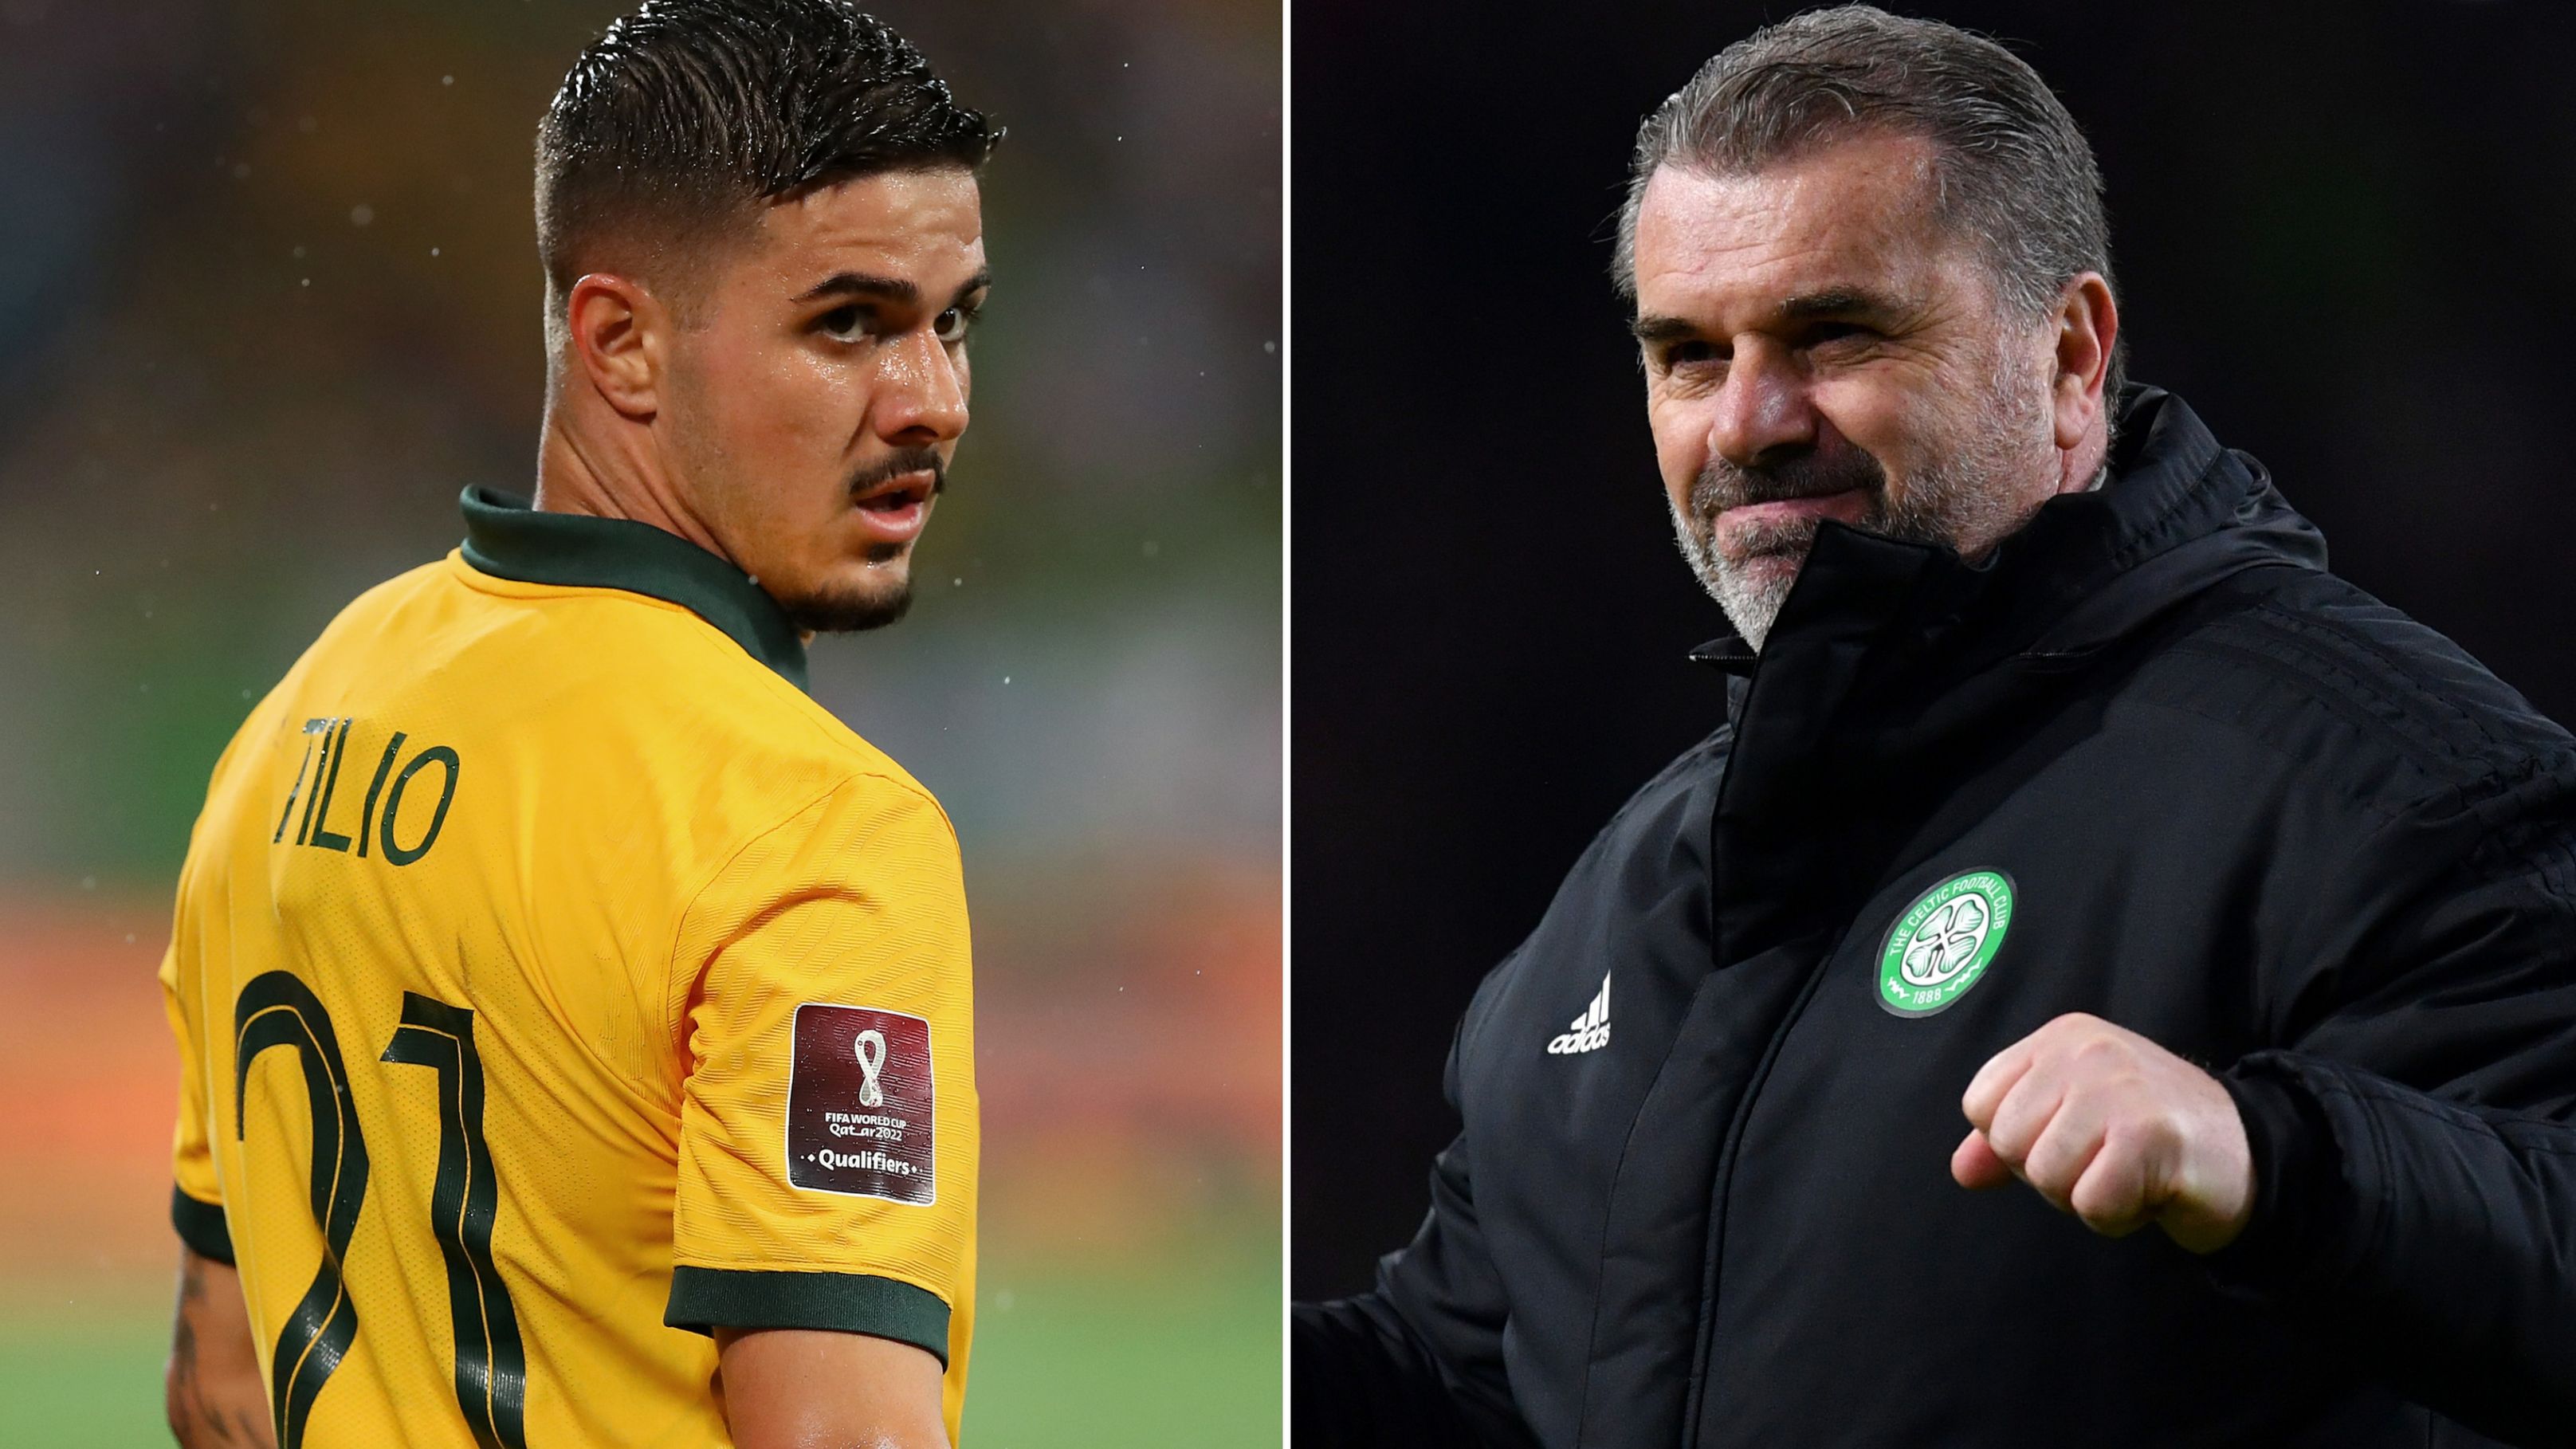 Ange Postecoglou believes the Socceroos have 'stalled' since he stopped coaching them